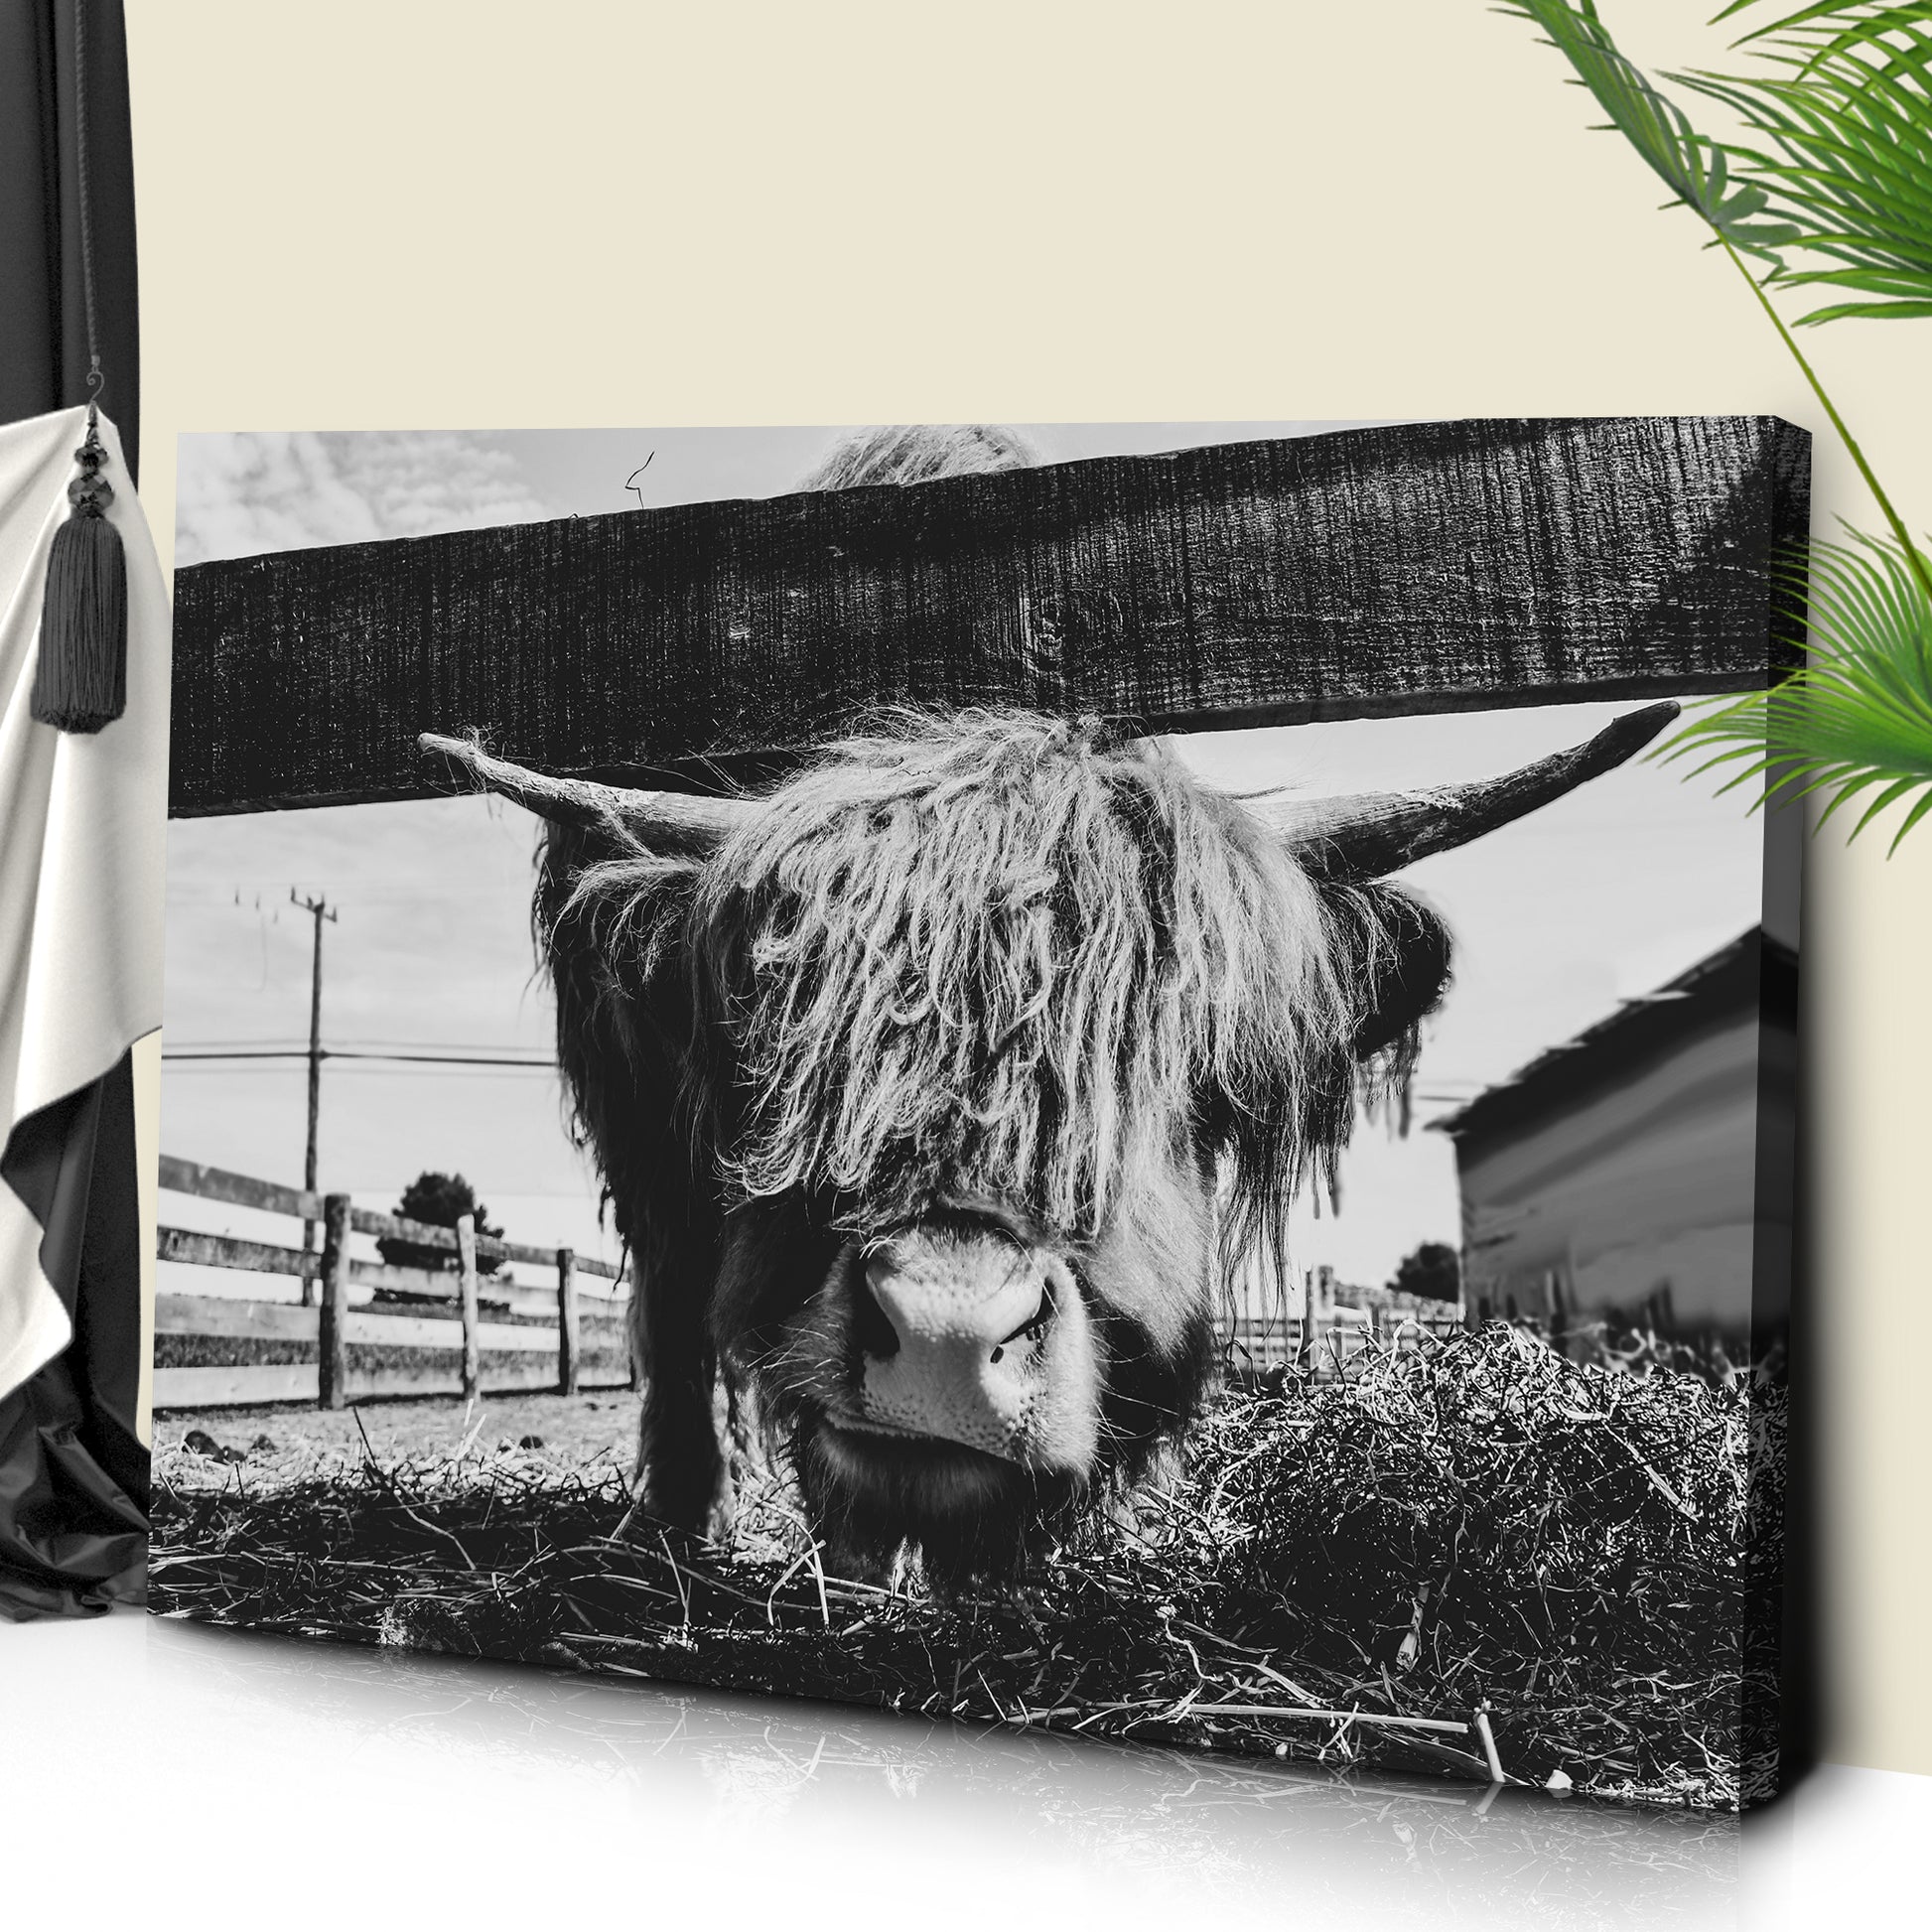 Curious Highland Cattle Monochrome Canvas Wall Art Style 1 - Image by Tailored Canvases